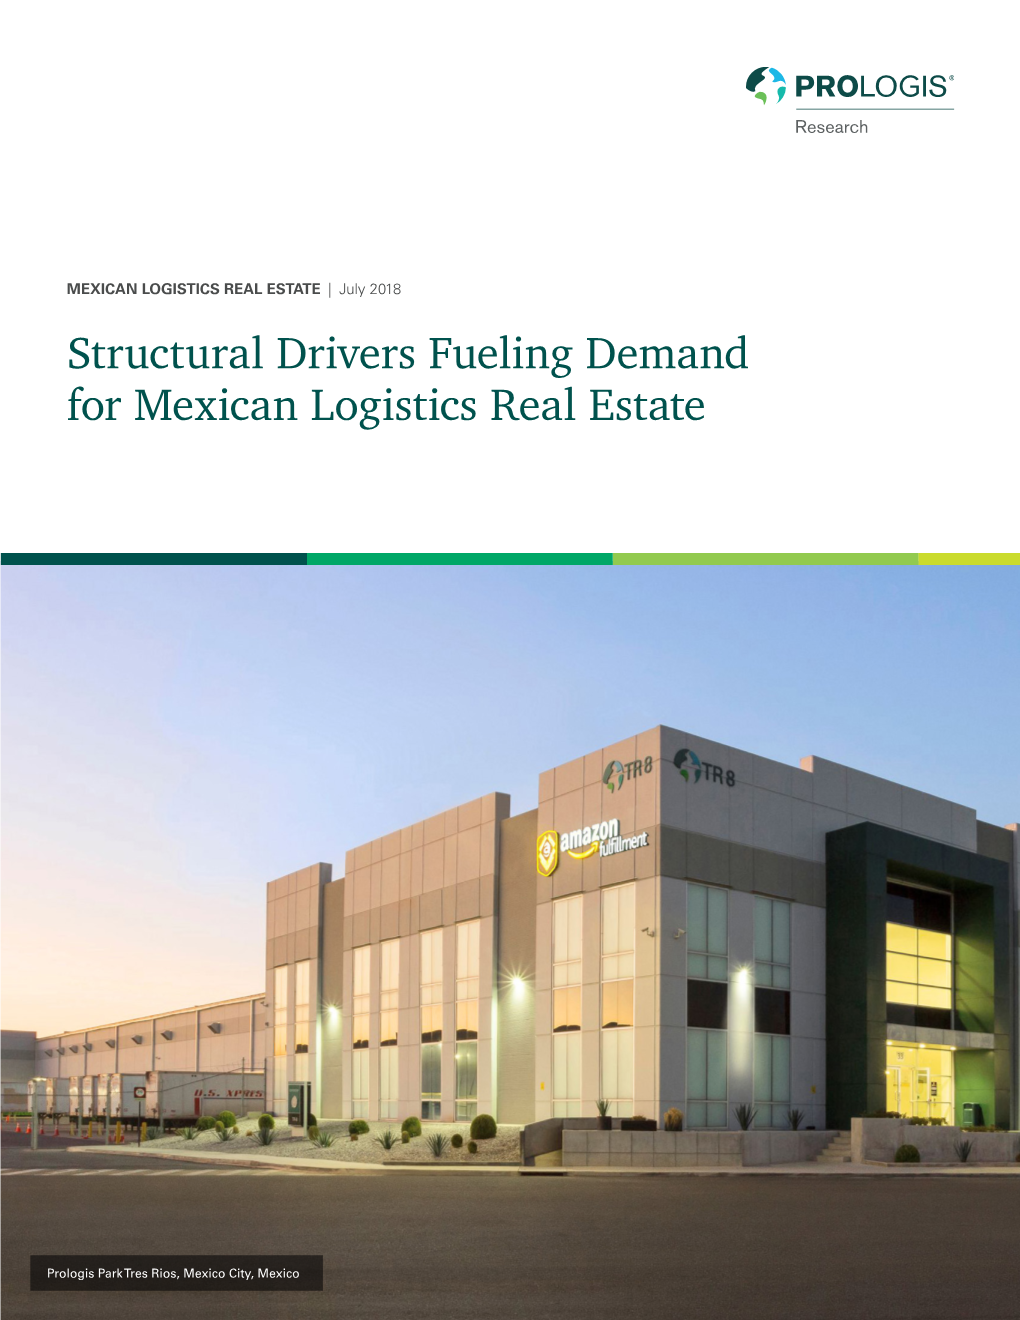 Structural Drivers Fueling Demand for Mexican Logistics Real Estate